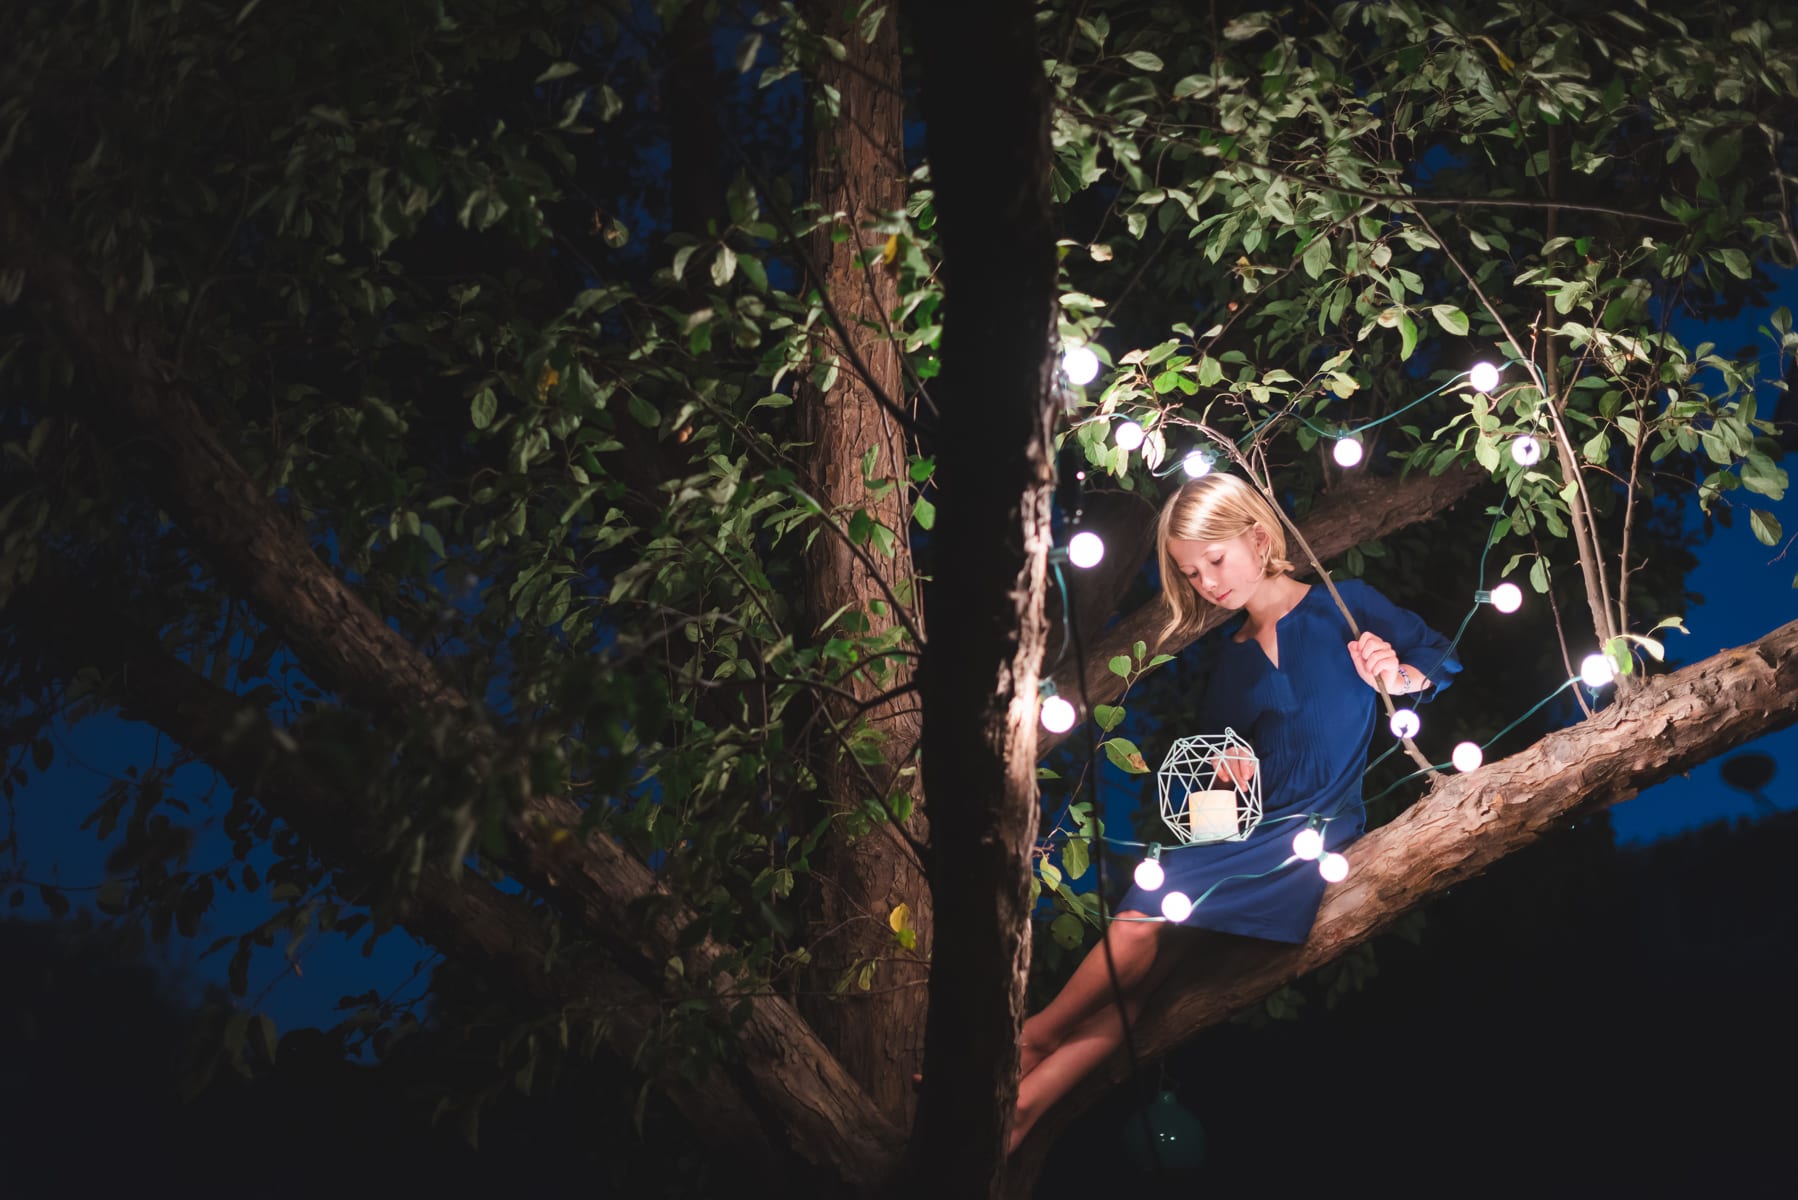 Outdoor Fairy Light Photos | Boulder, CO | Family Photography | From the Hip Photo